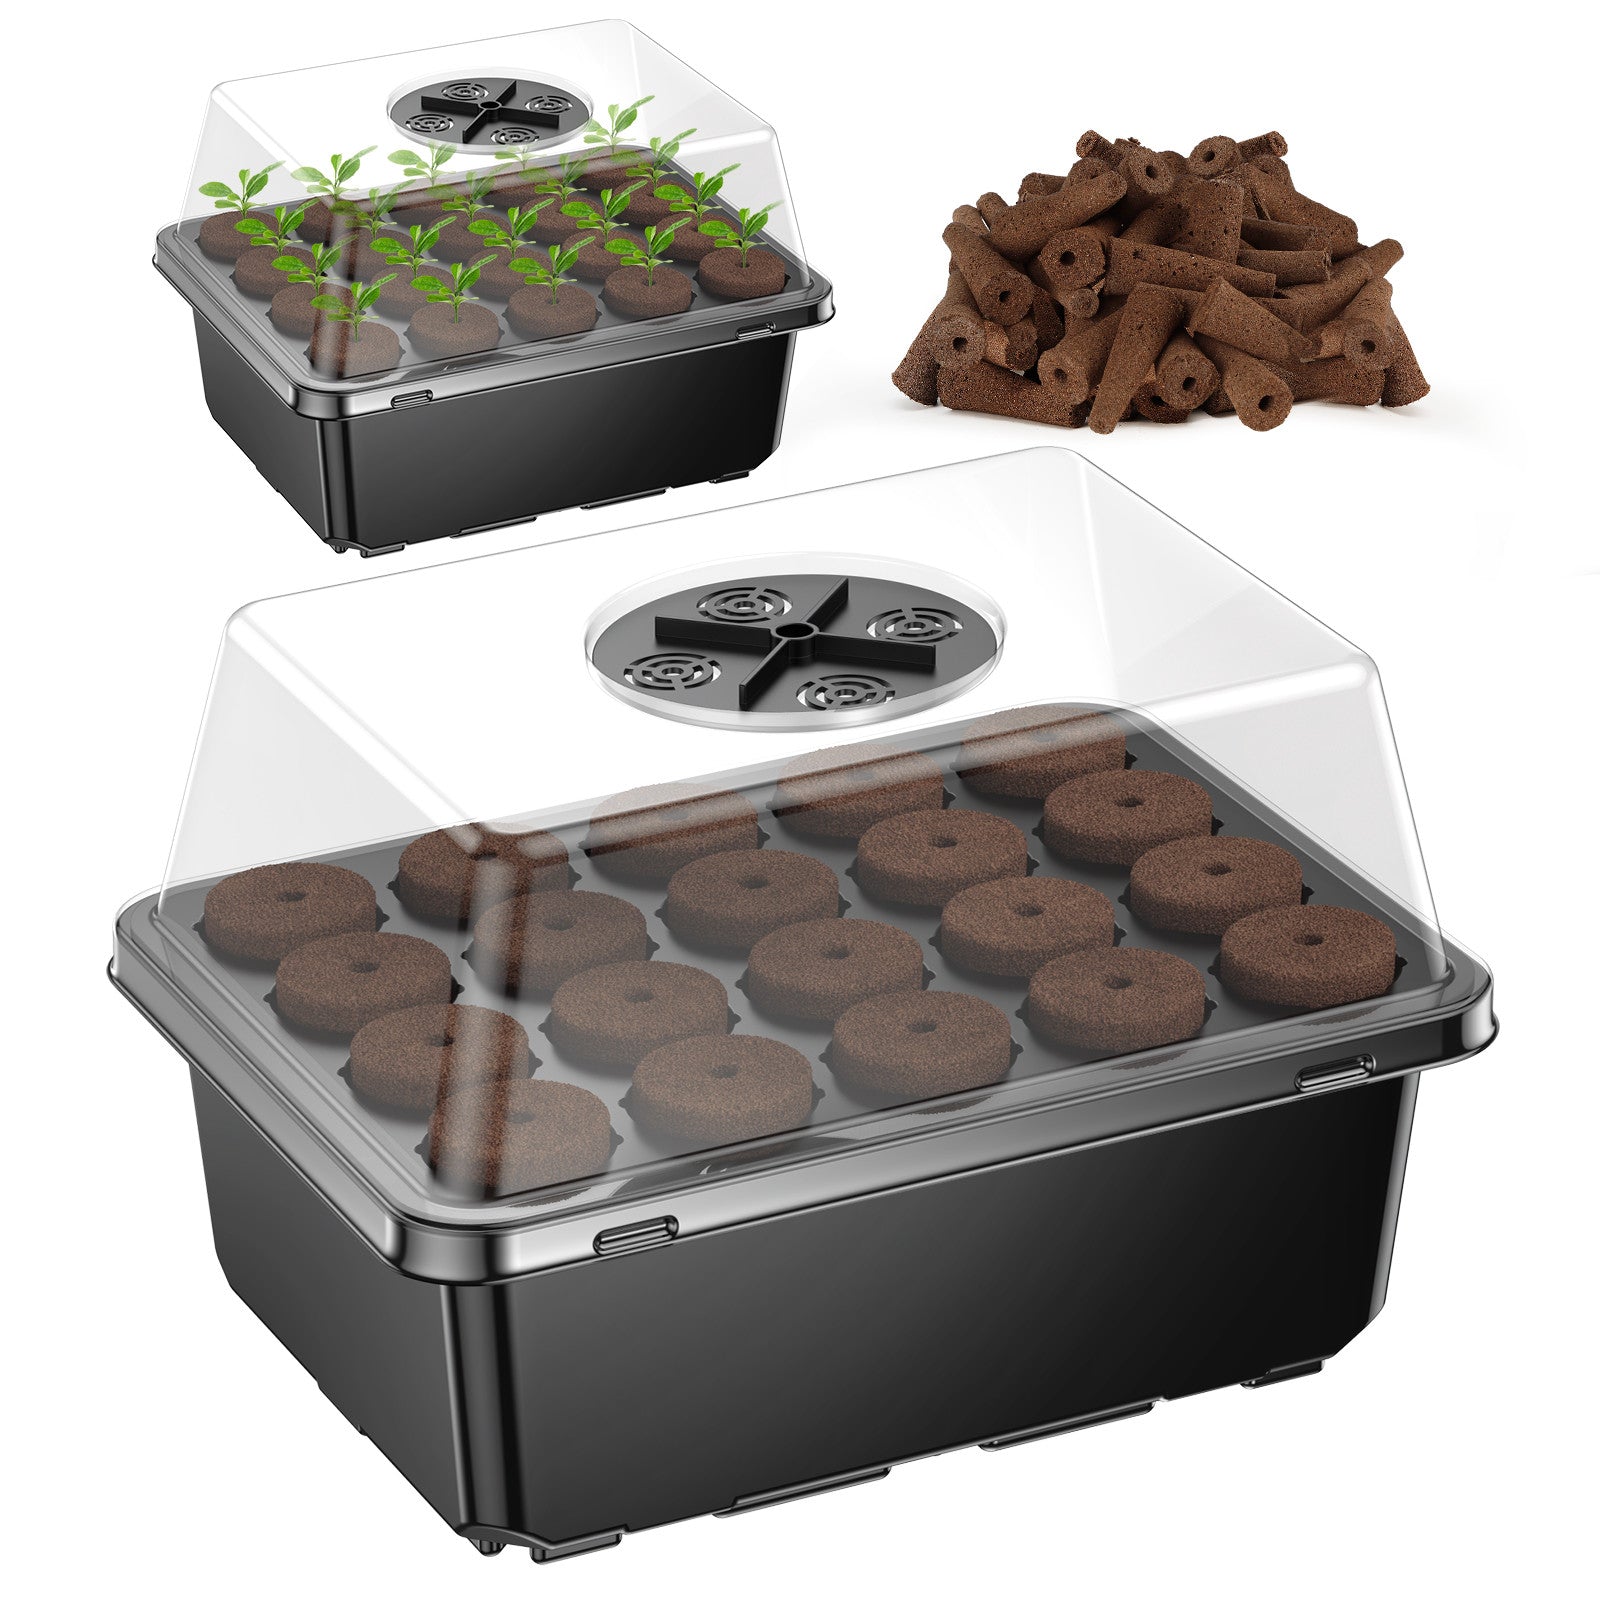 Ahopegarden 40-Cell Seed Starting Trays Black